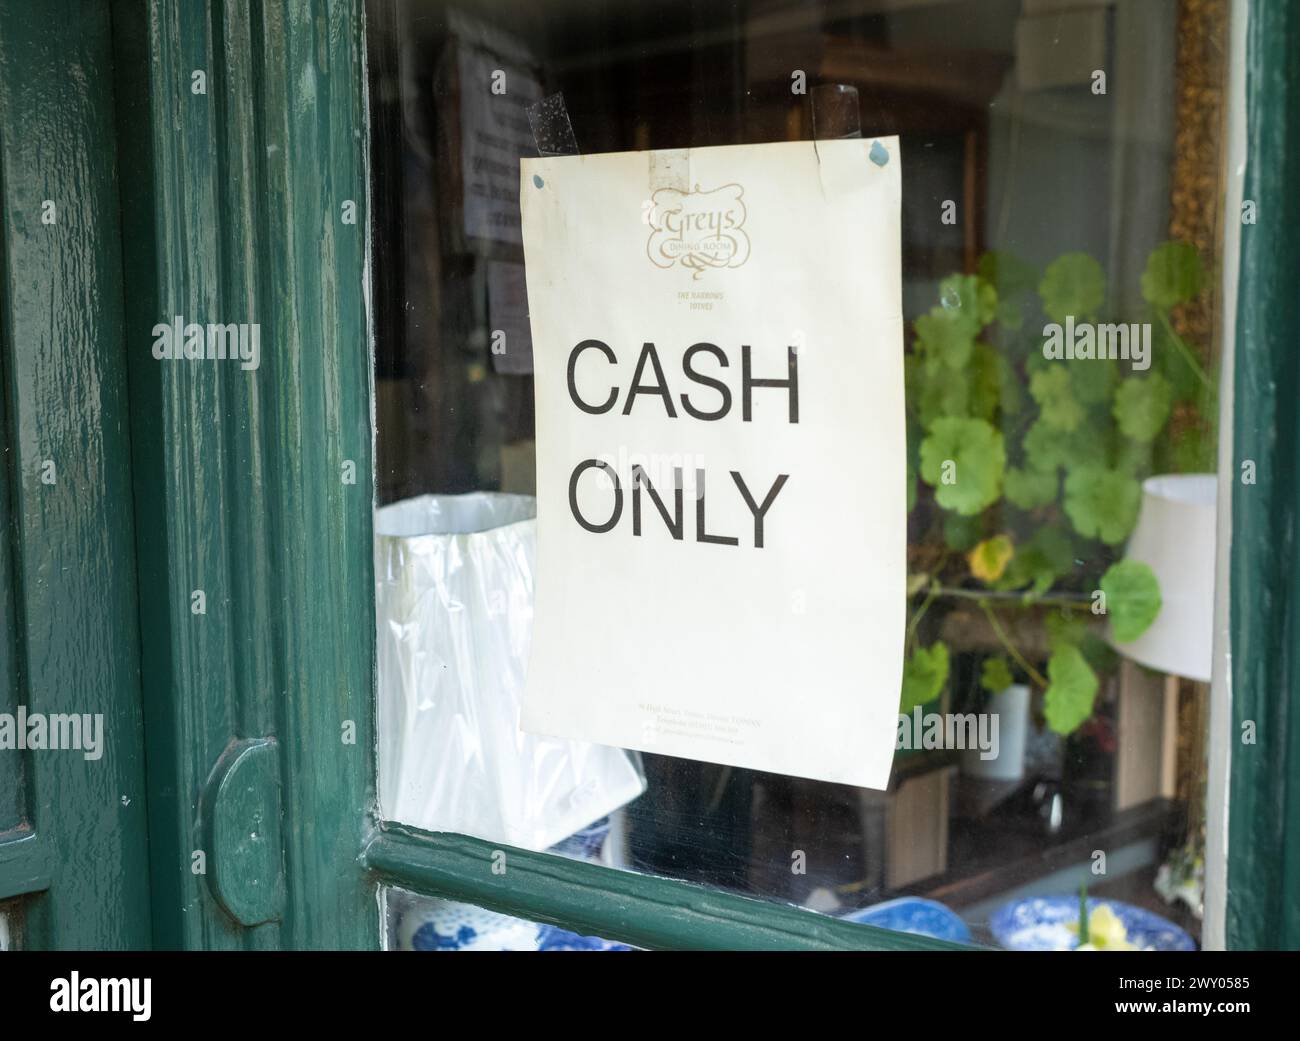 A sign in the window of a cafe advising customers they only accept cash, Totnes, Devon, UK. Stock Photo